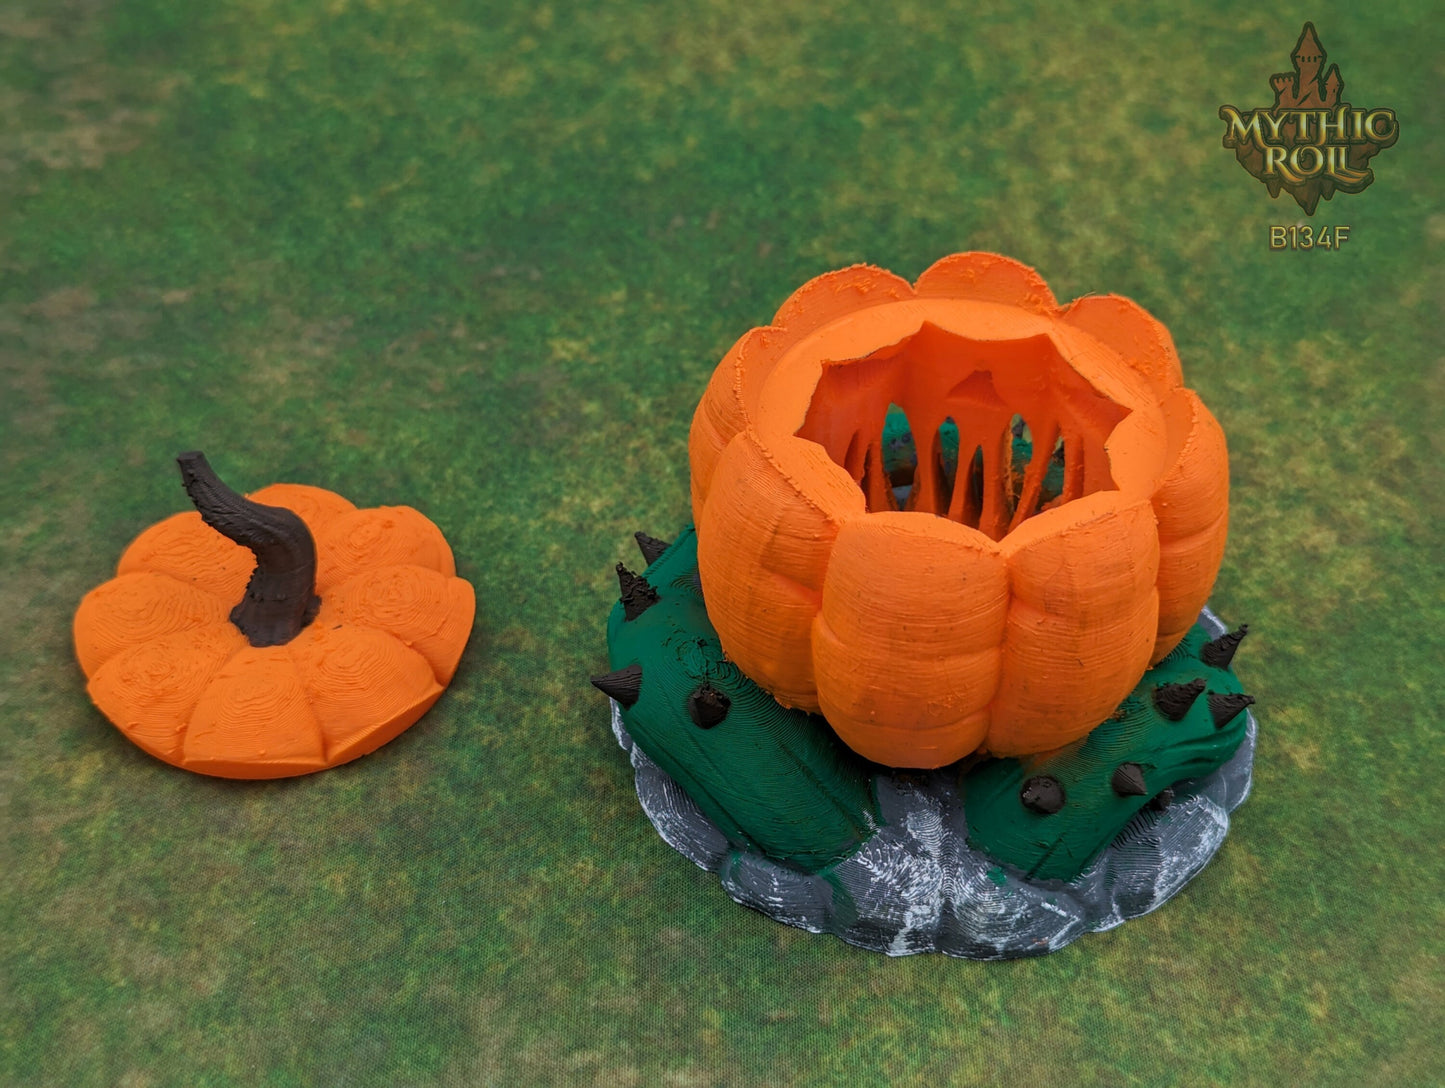 Pumpkin Jack O' Lantern 3D Printed Dice Jail - Mythic Roll Collection by Unchained Games - Guard Your Dice with Spooky Delight!